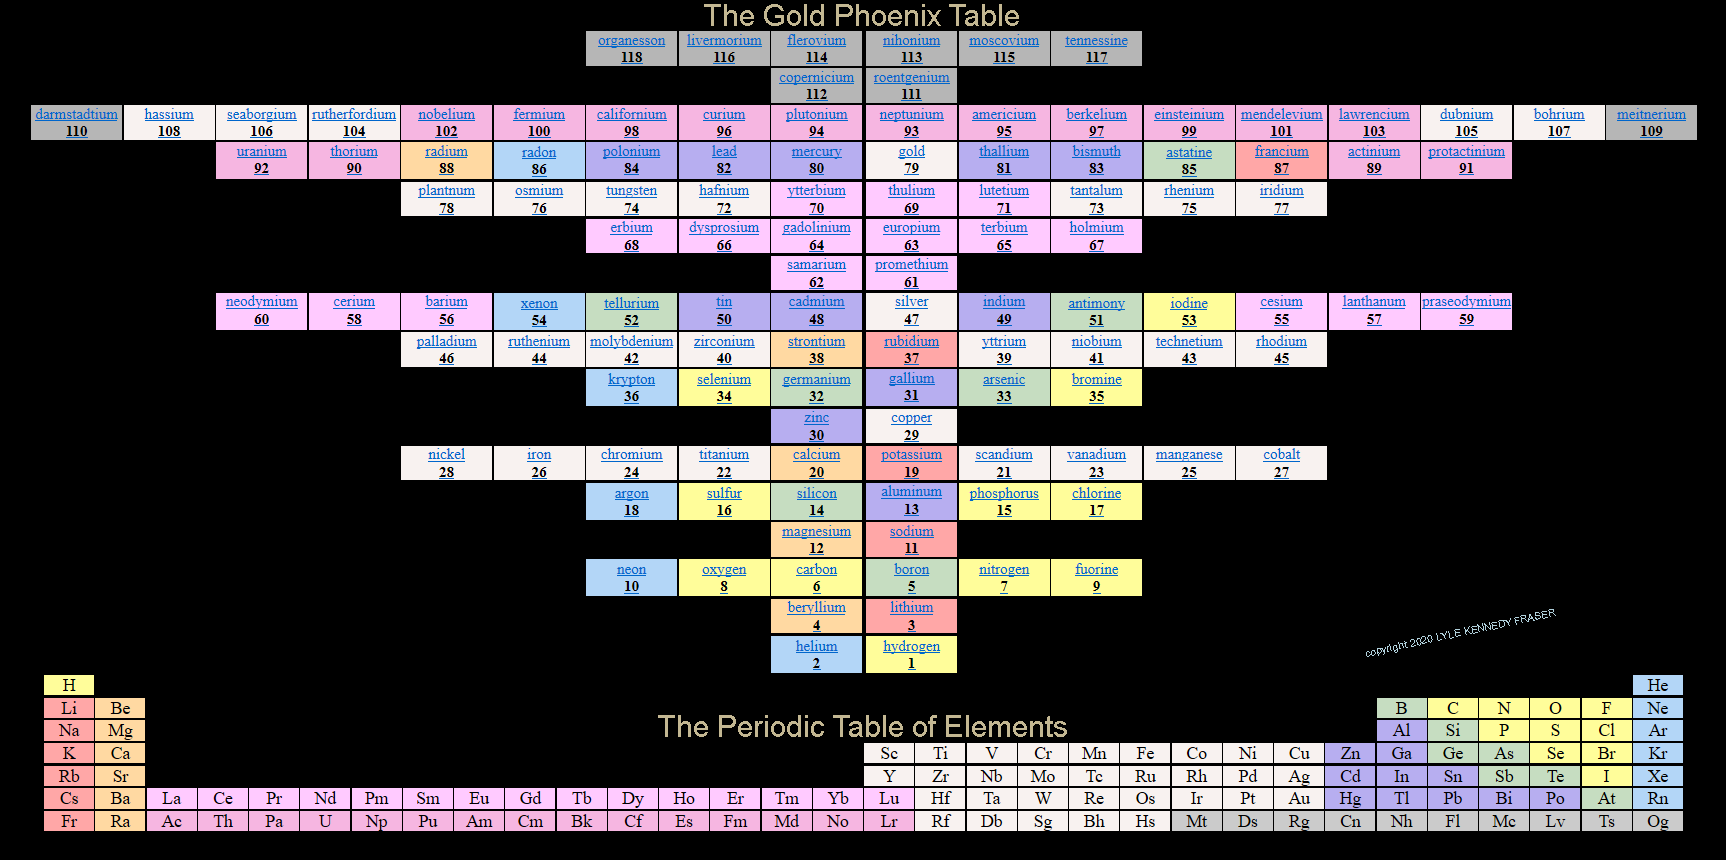 table of elements